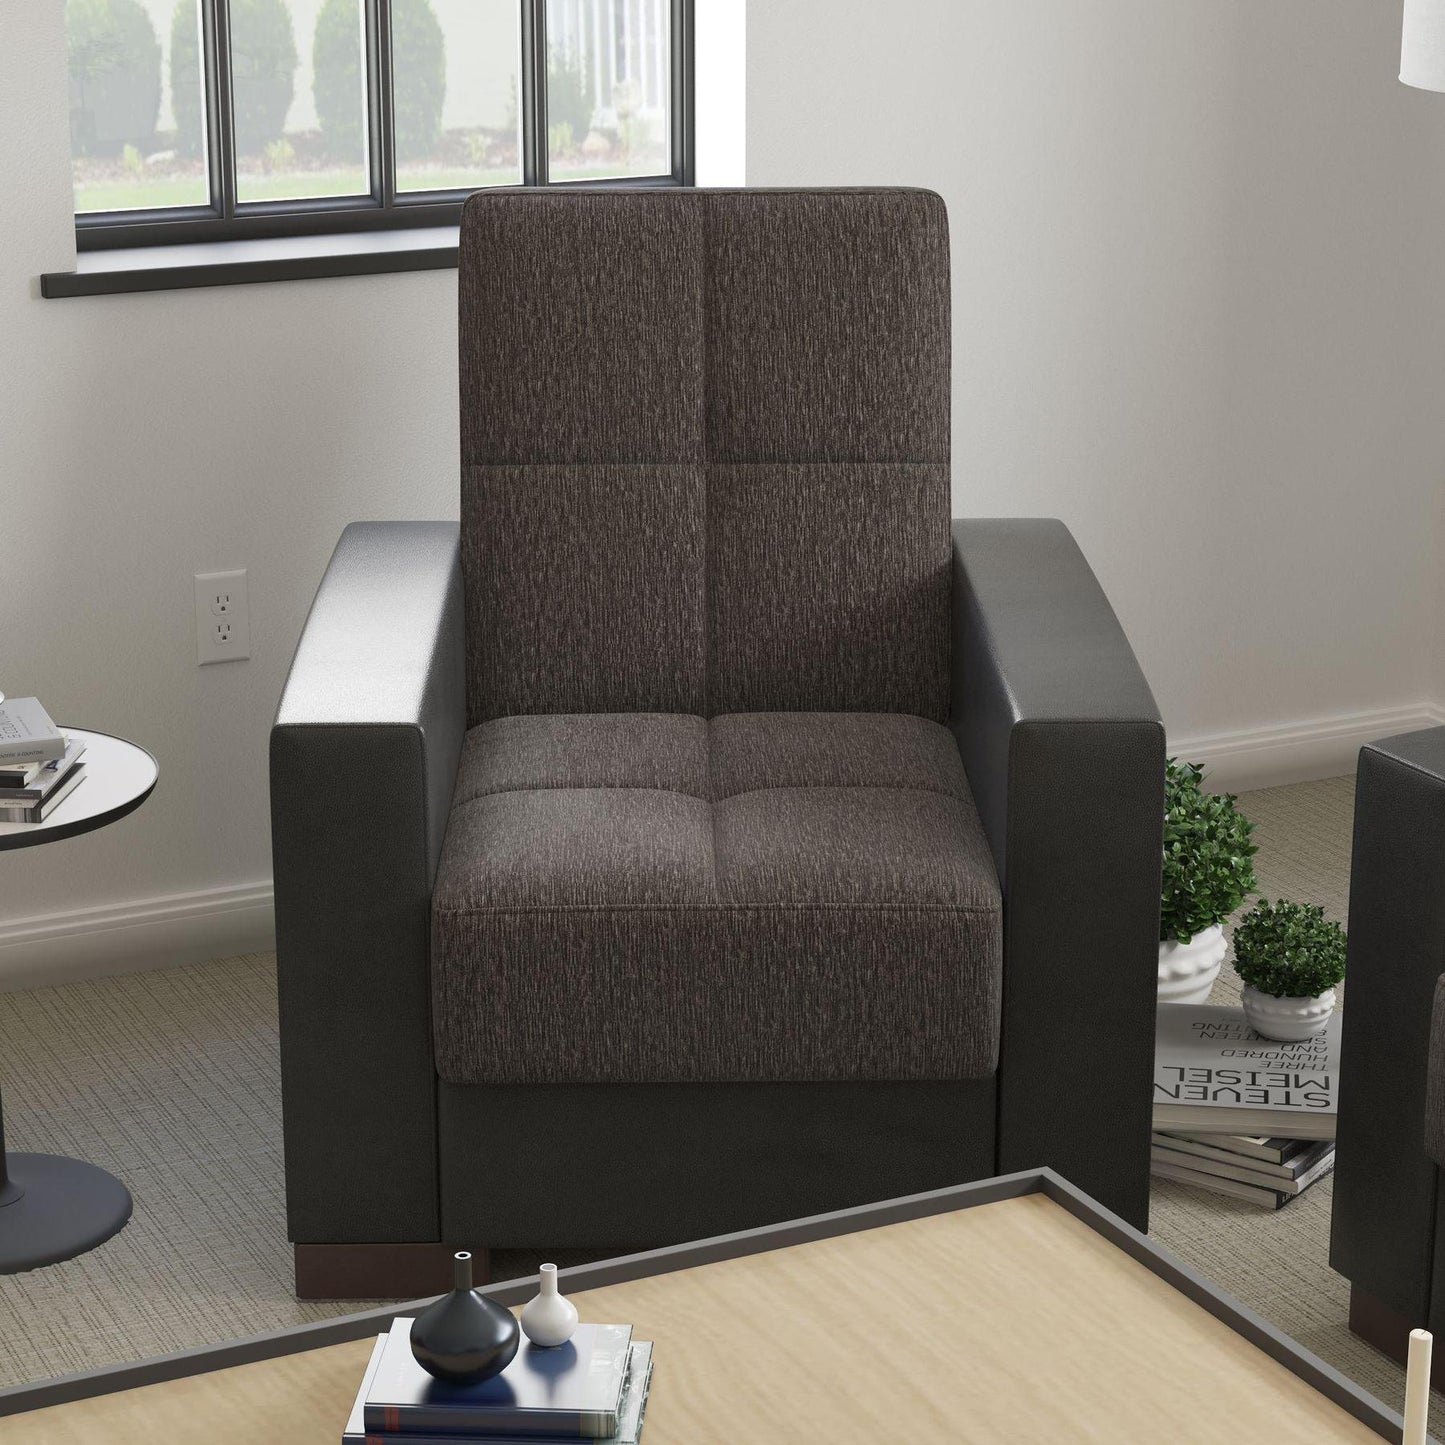 Modern design, Dark Slate Gray, Black , Chenille, Artificial Leather upholstered convertible Armchair with underseat storage from Voyage Track by Ottomanson in living room lifestyle setting by itself. This Armchair measures 38 inches width by 36 inches depth by 41 inches height.